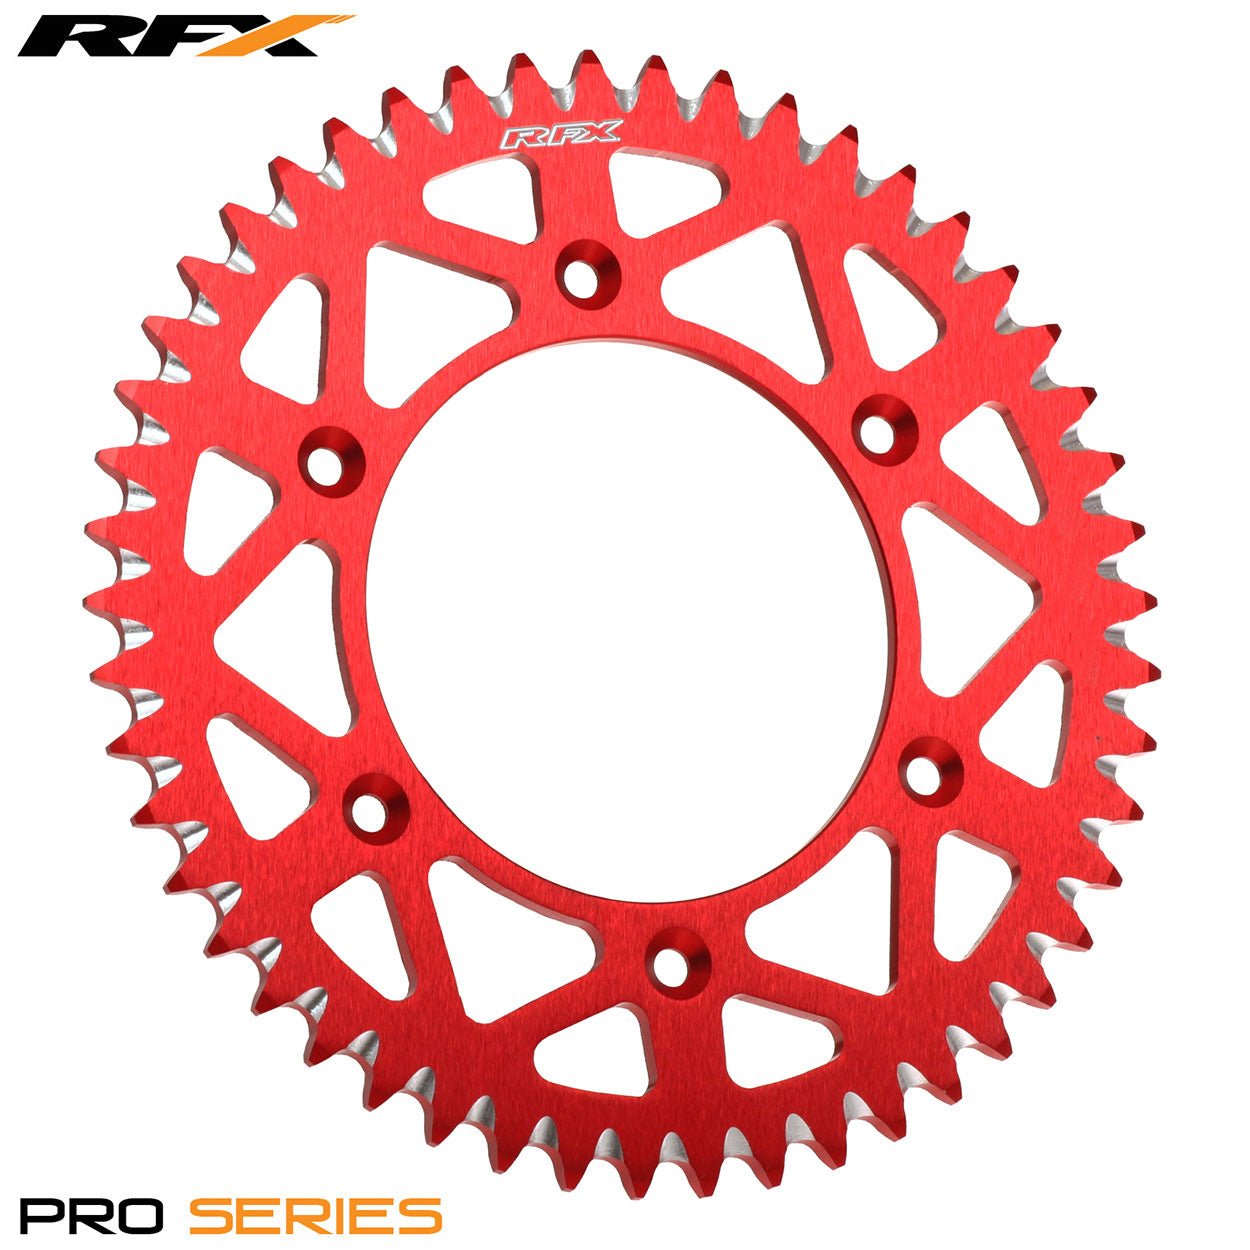 RFX Pro Series Elite Rear Sprocket Husqvarna 125-610 Up To 2013 Gas Gas EC125-300 All Years (Red 49T - Red - RFX